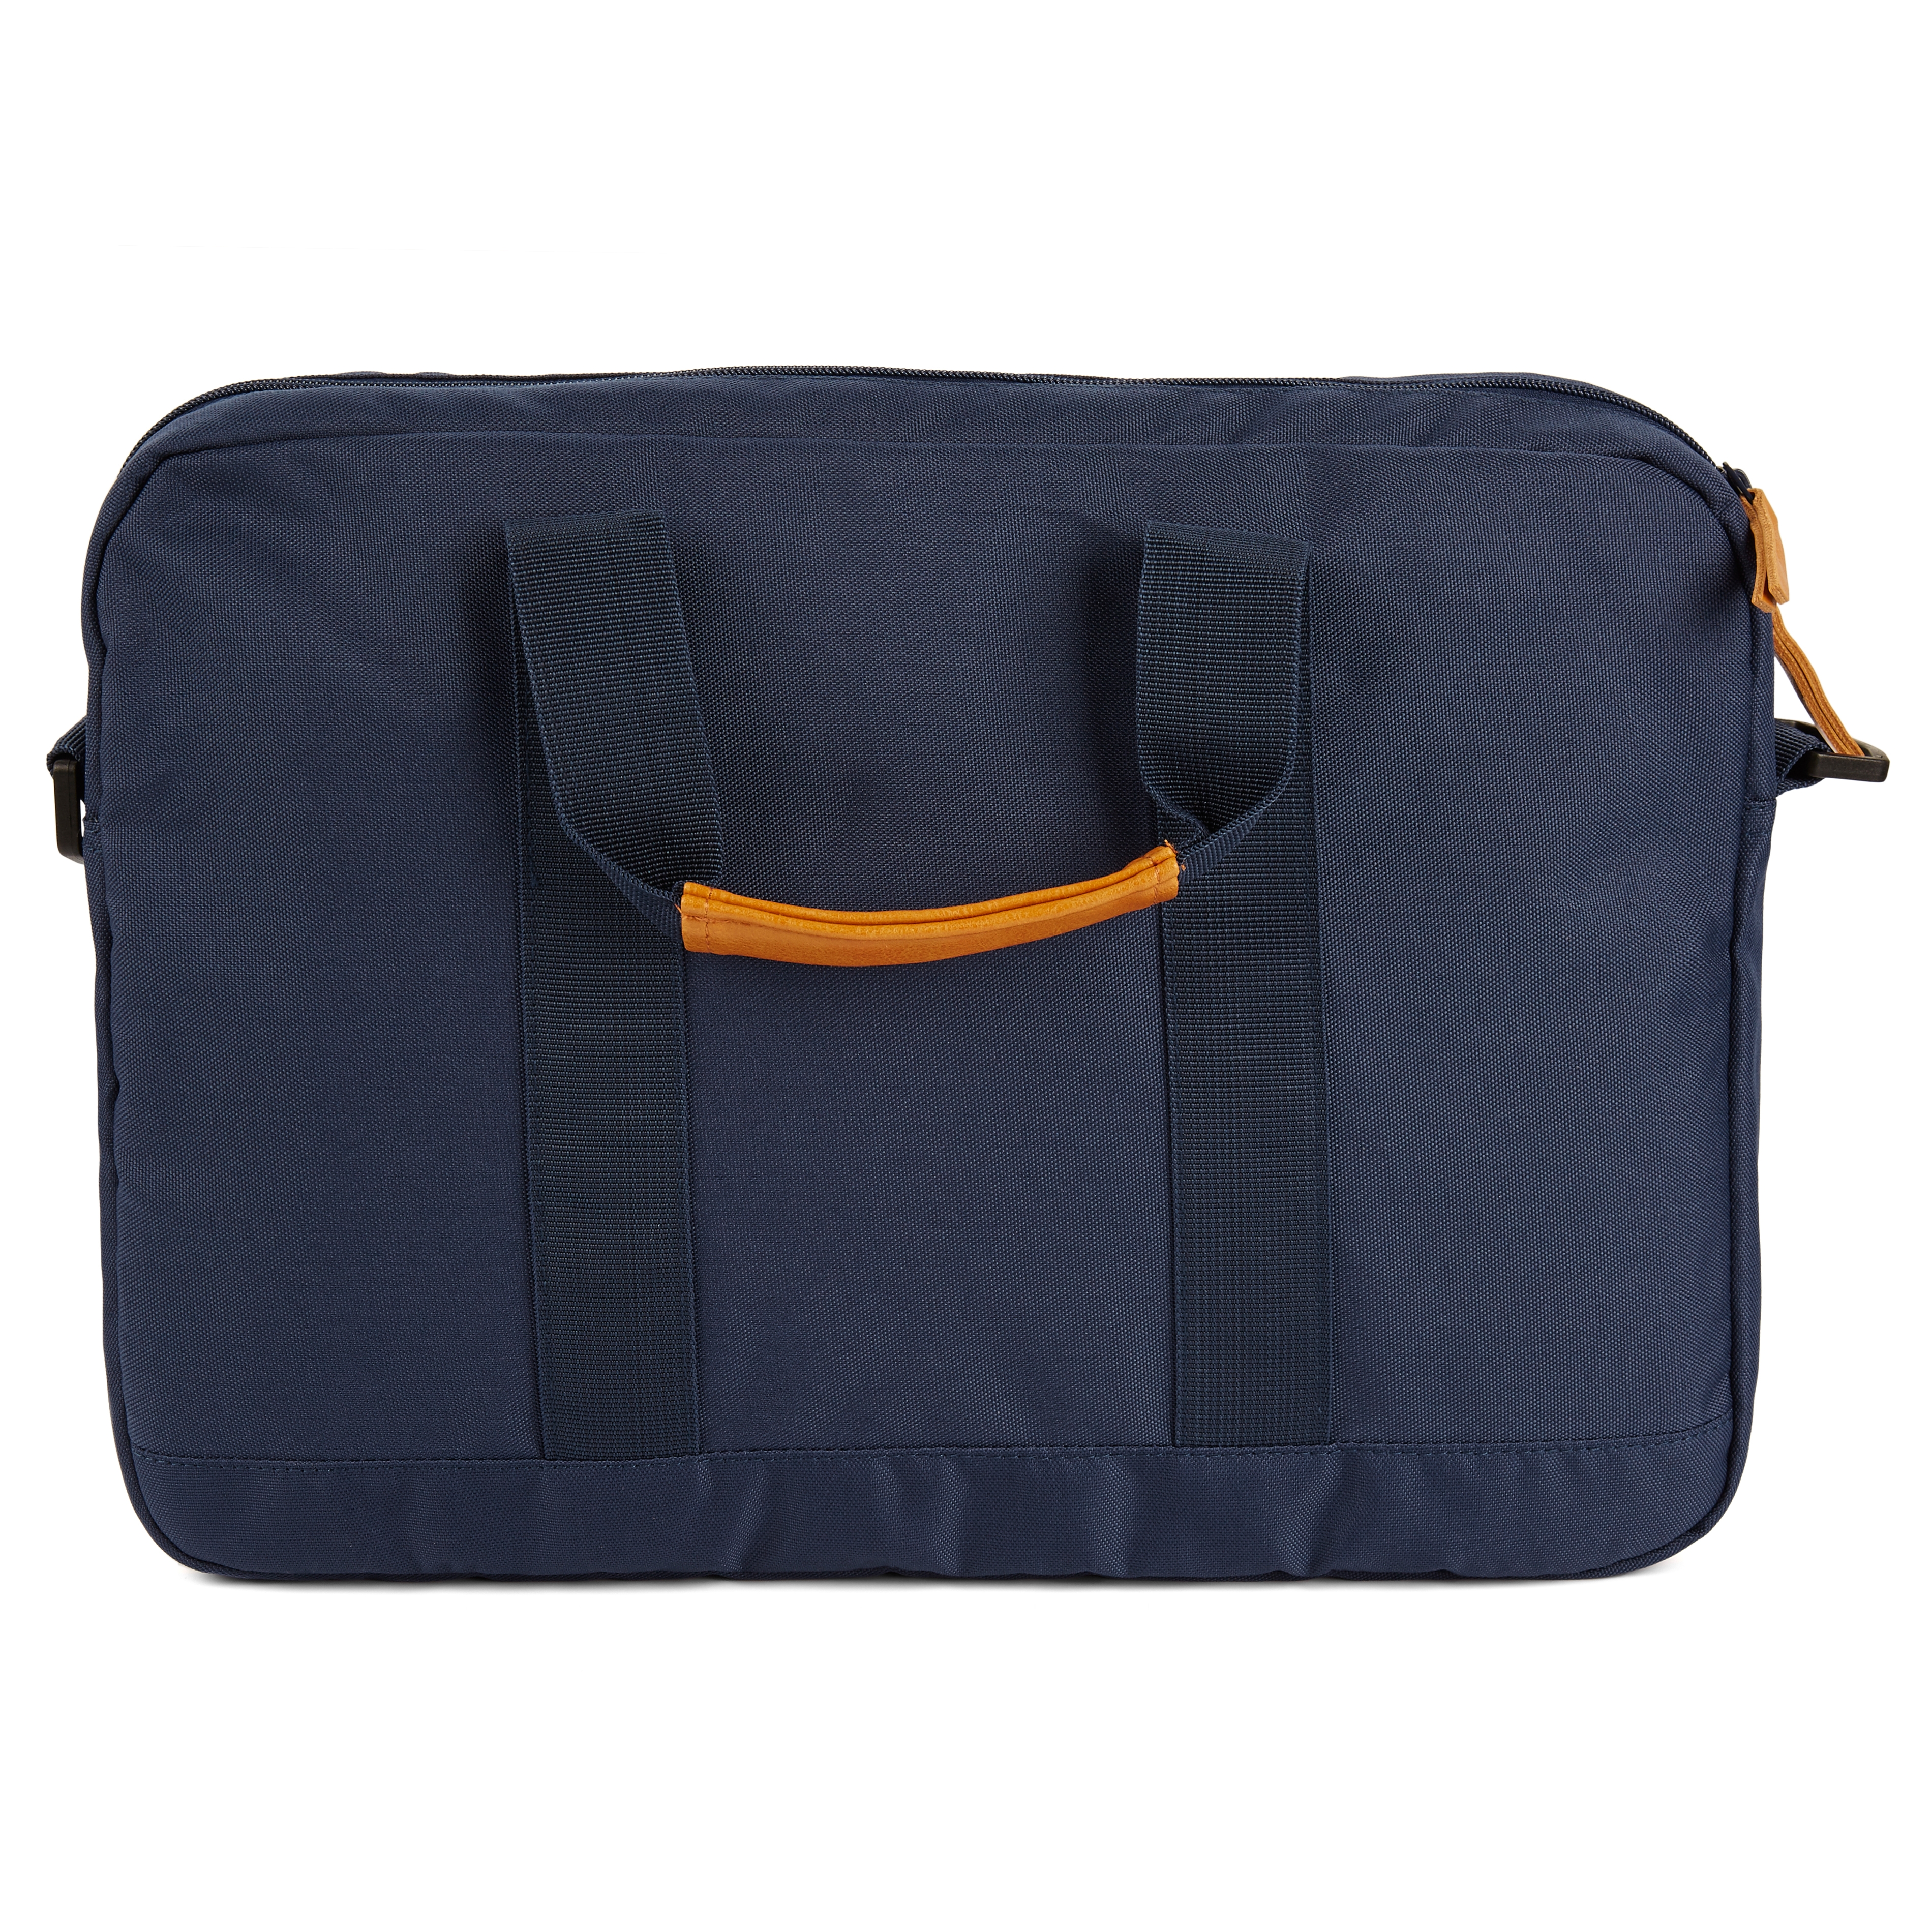 Blue Foam Leather And Fabric Trendy Laptop Bags